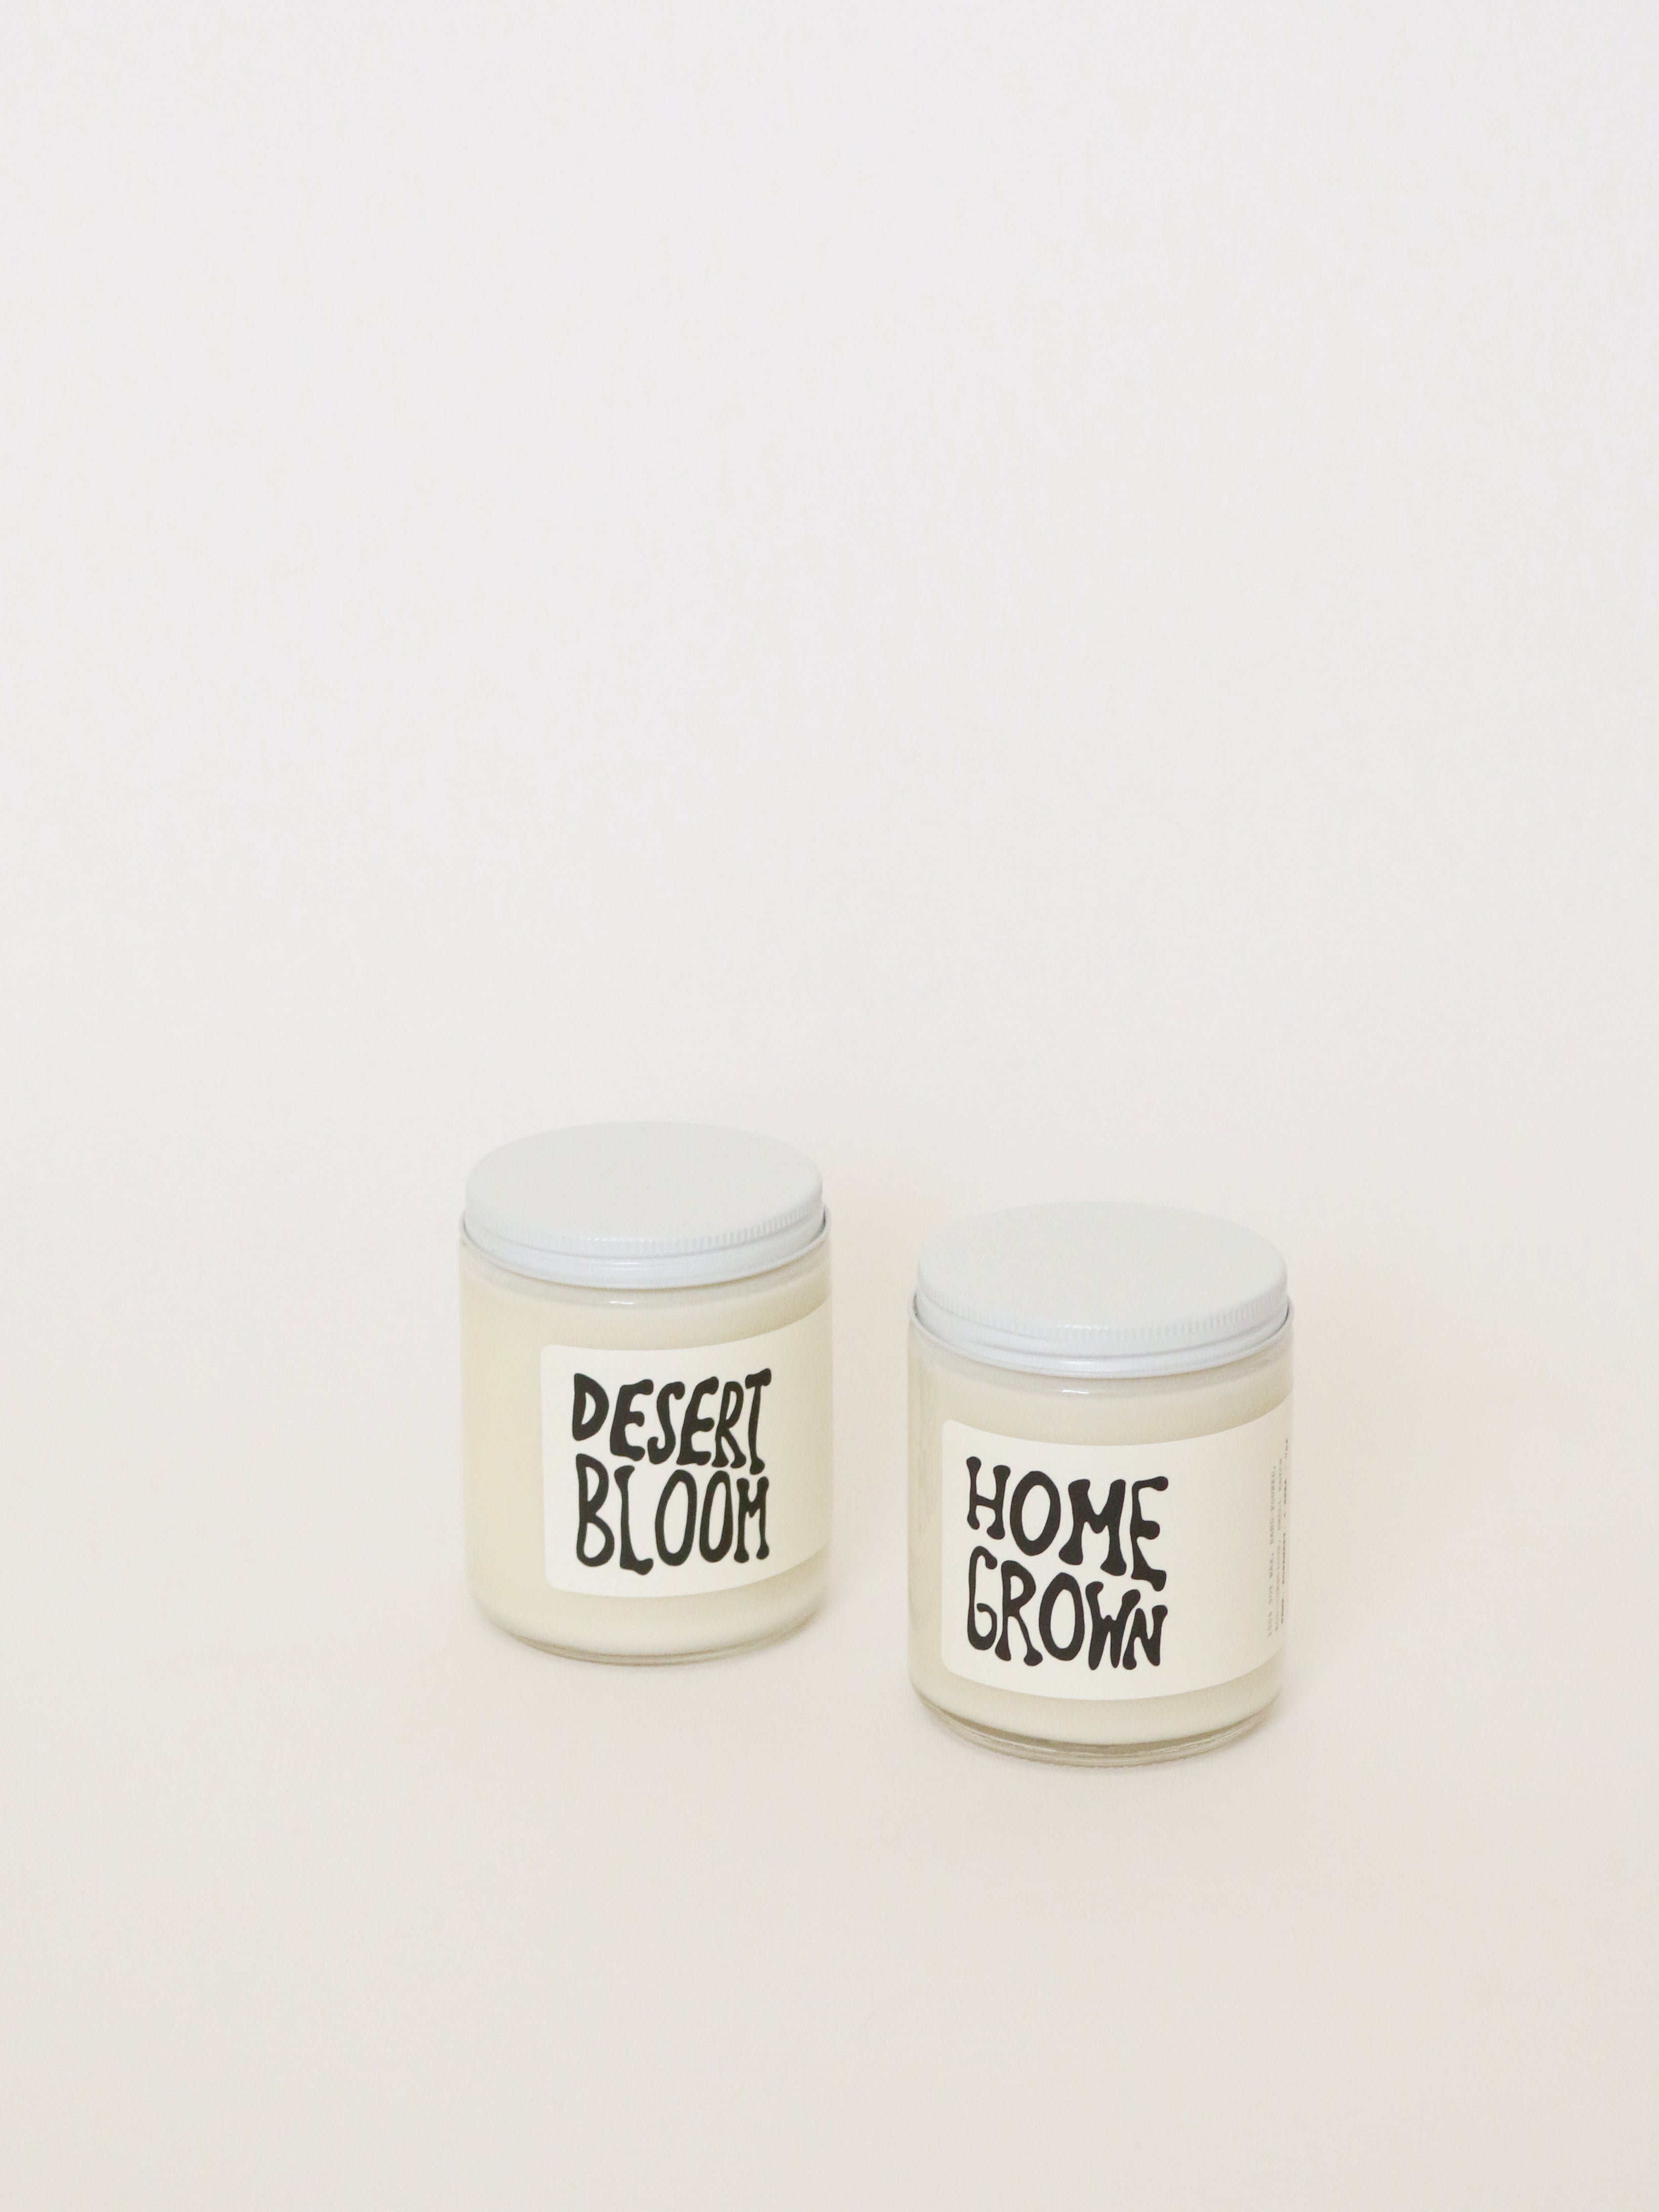 Desert Bloom Soy Candle by MOCO Candles